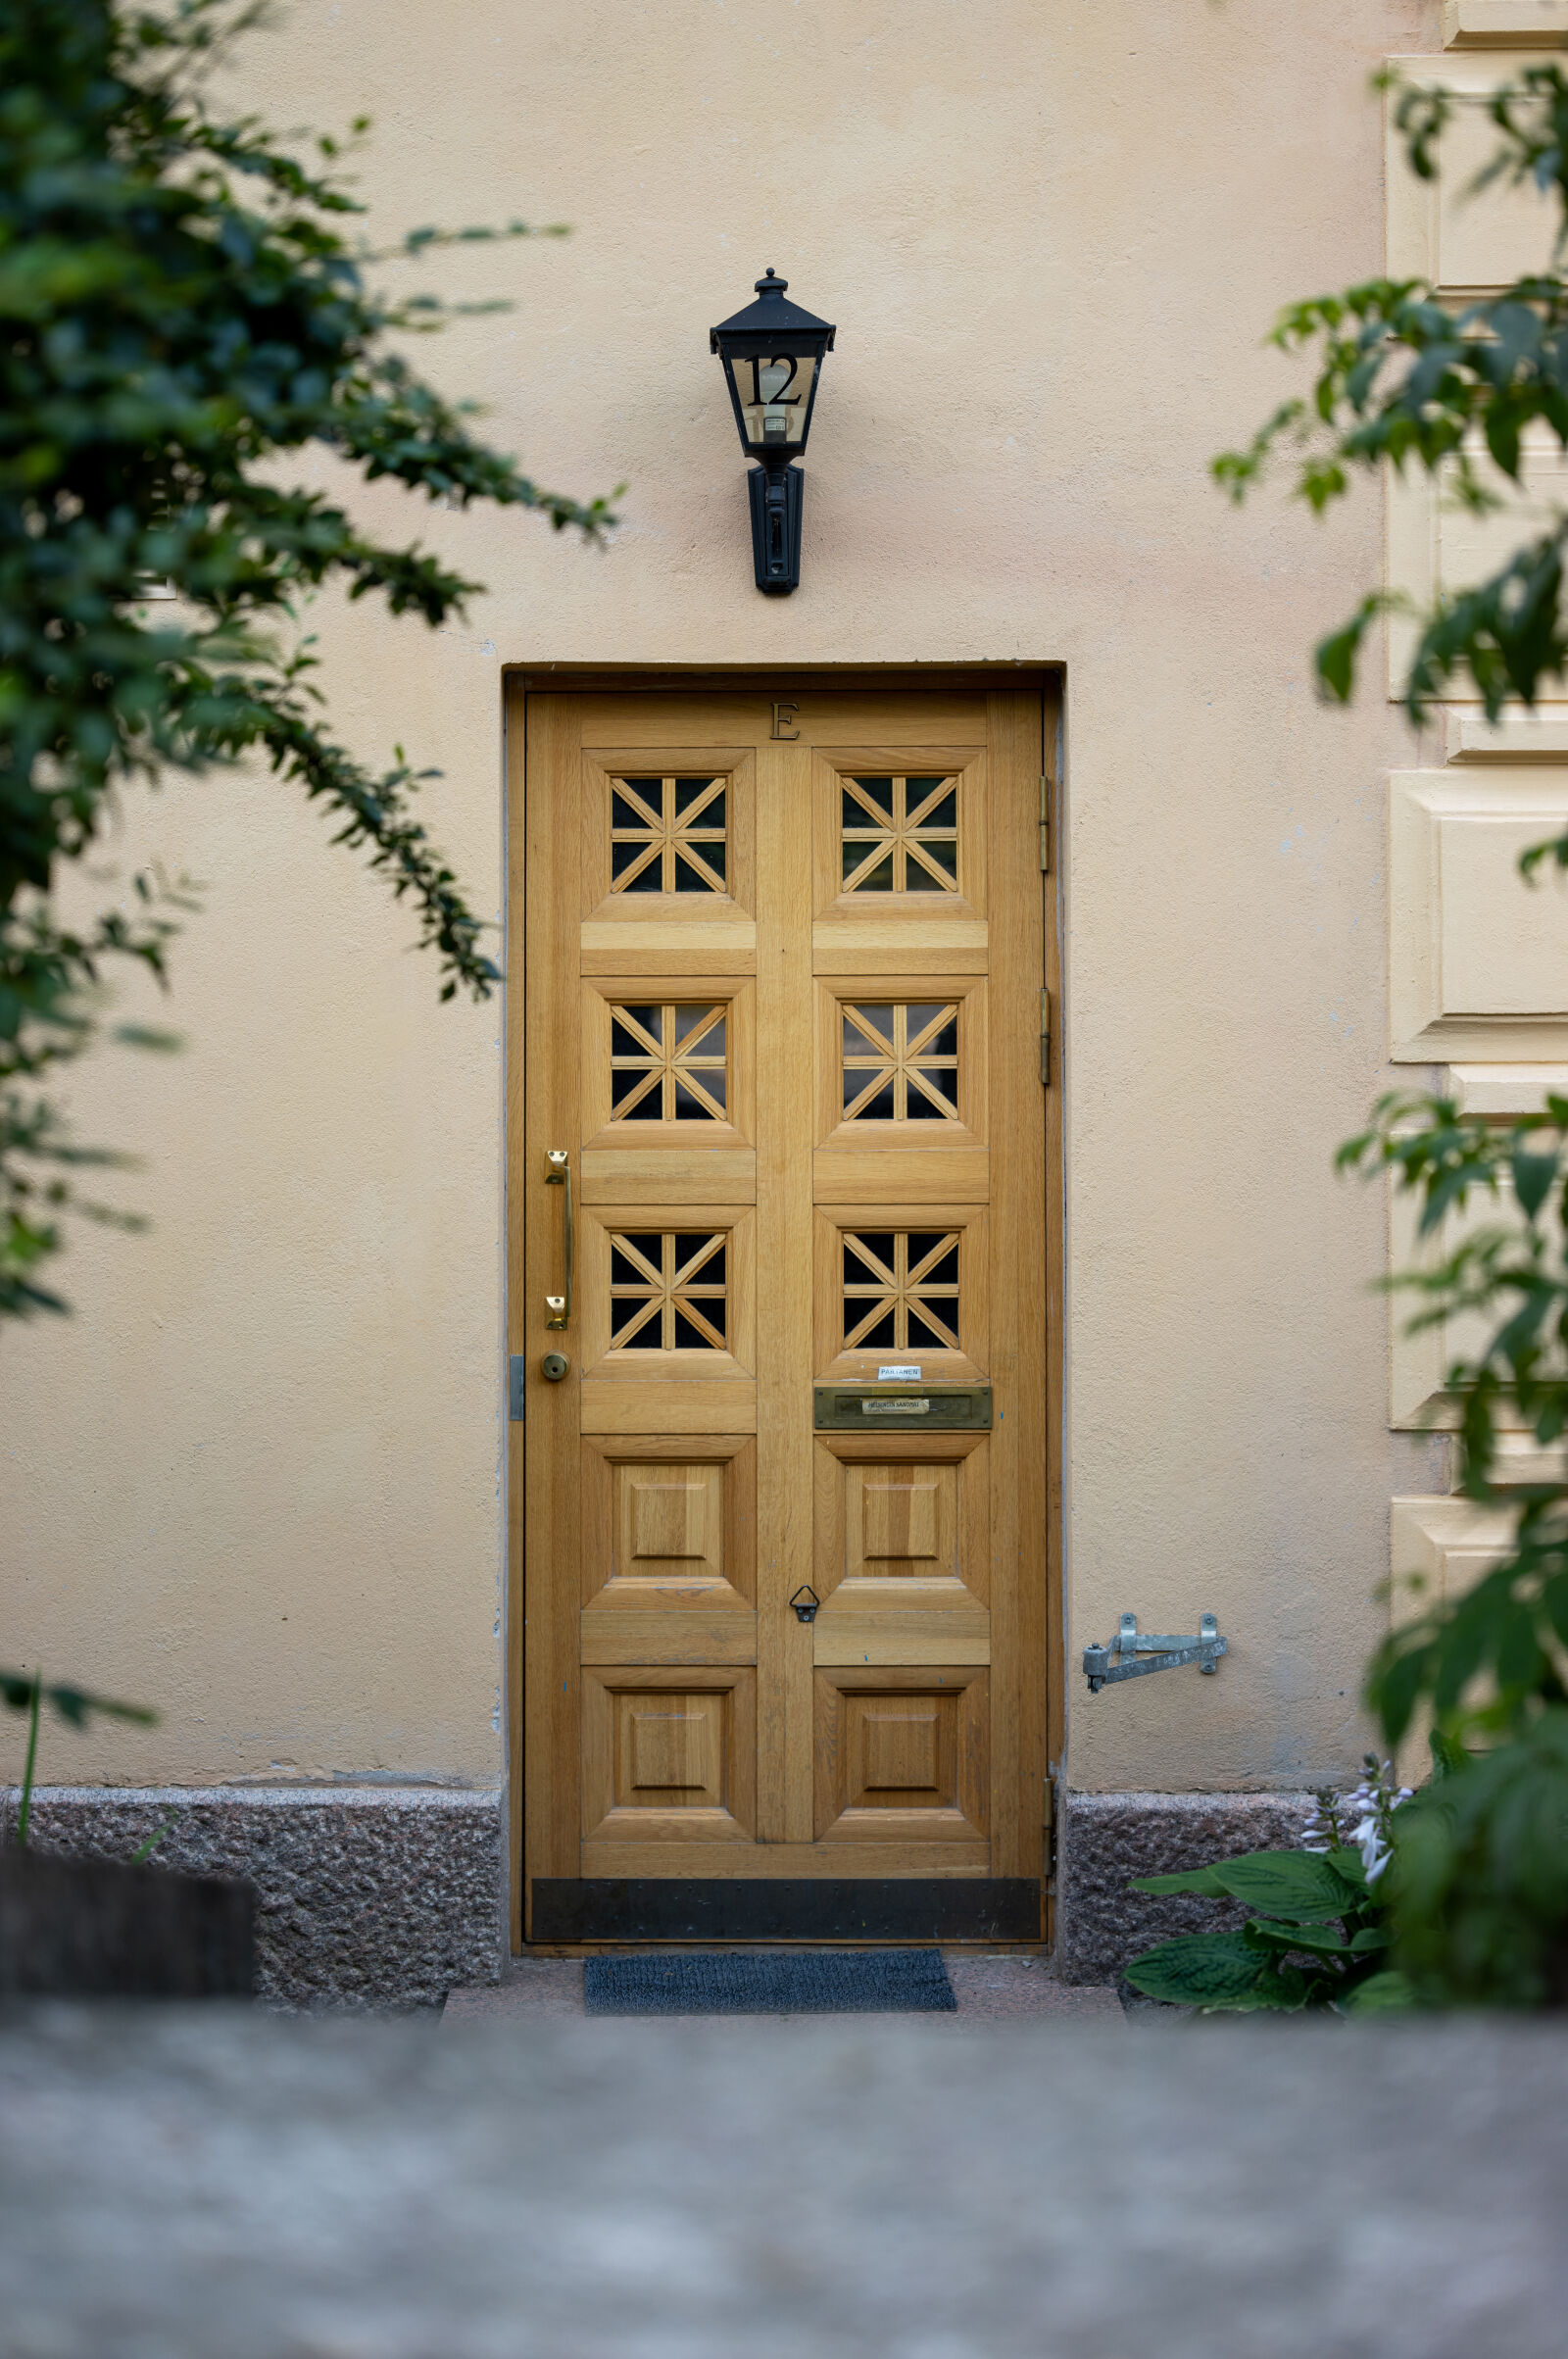 Sigma fp L sample photo. Doorway for wealth photography